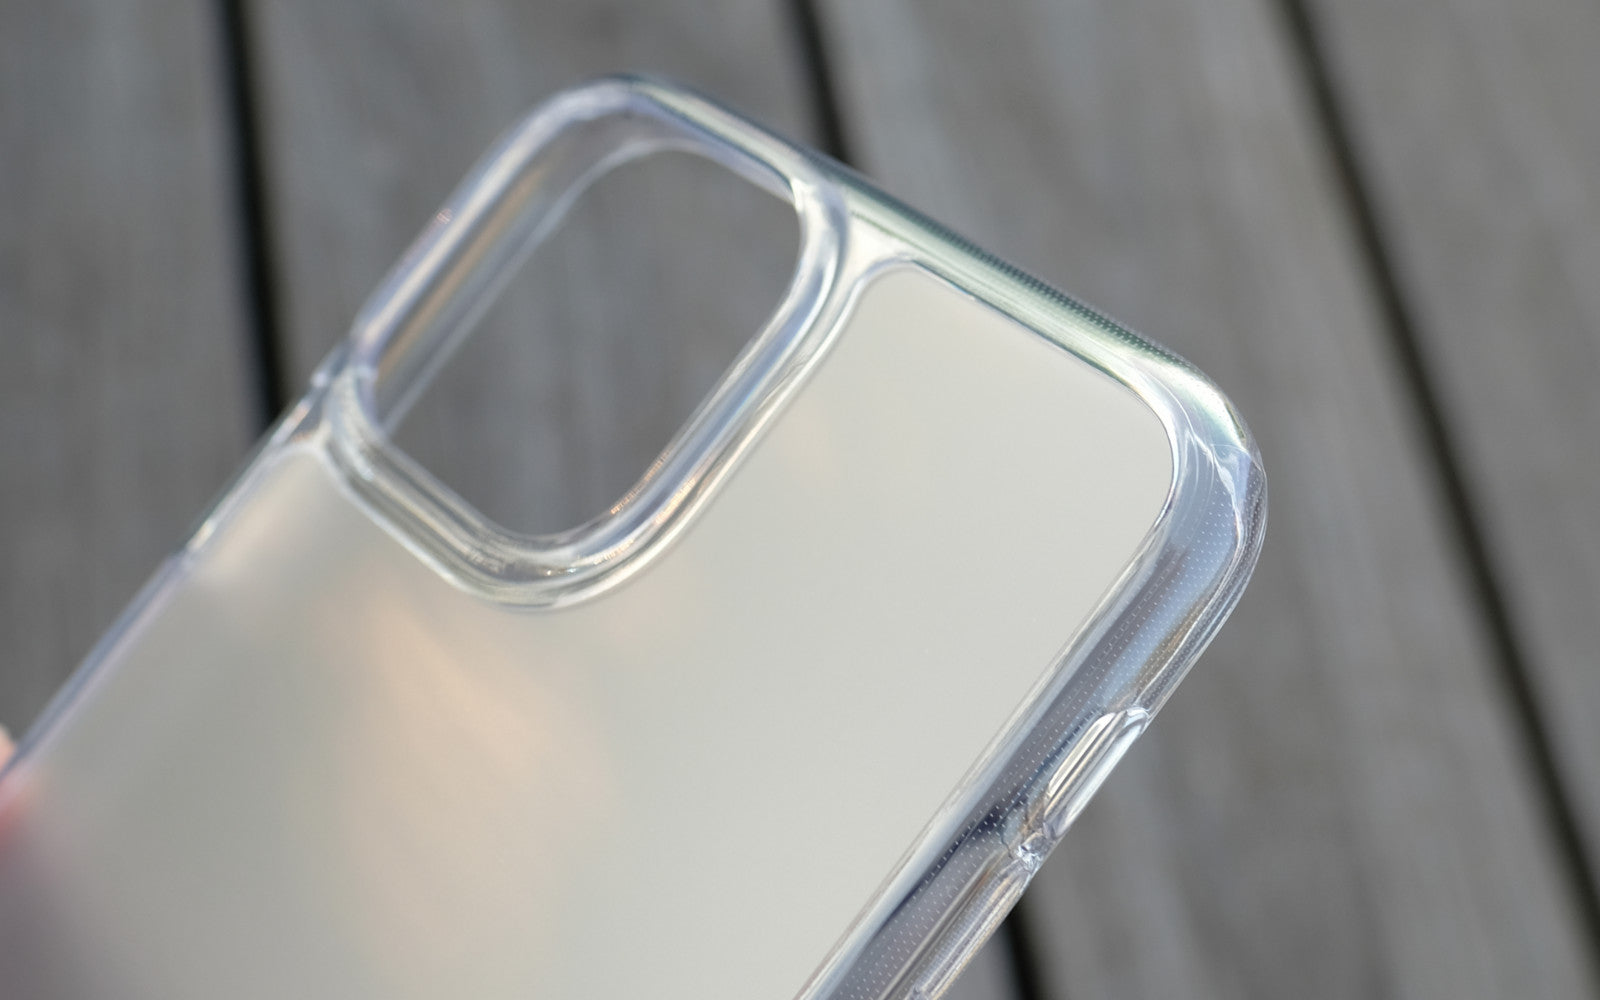 Bare Back Minimlist Shock Resistant Case with a Frosted Glass Back for iPhone 11 Pro and 11 Pro Max - Real Frosted Glass Back